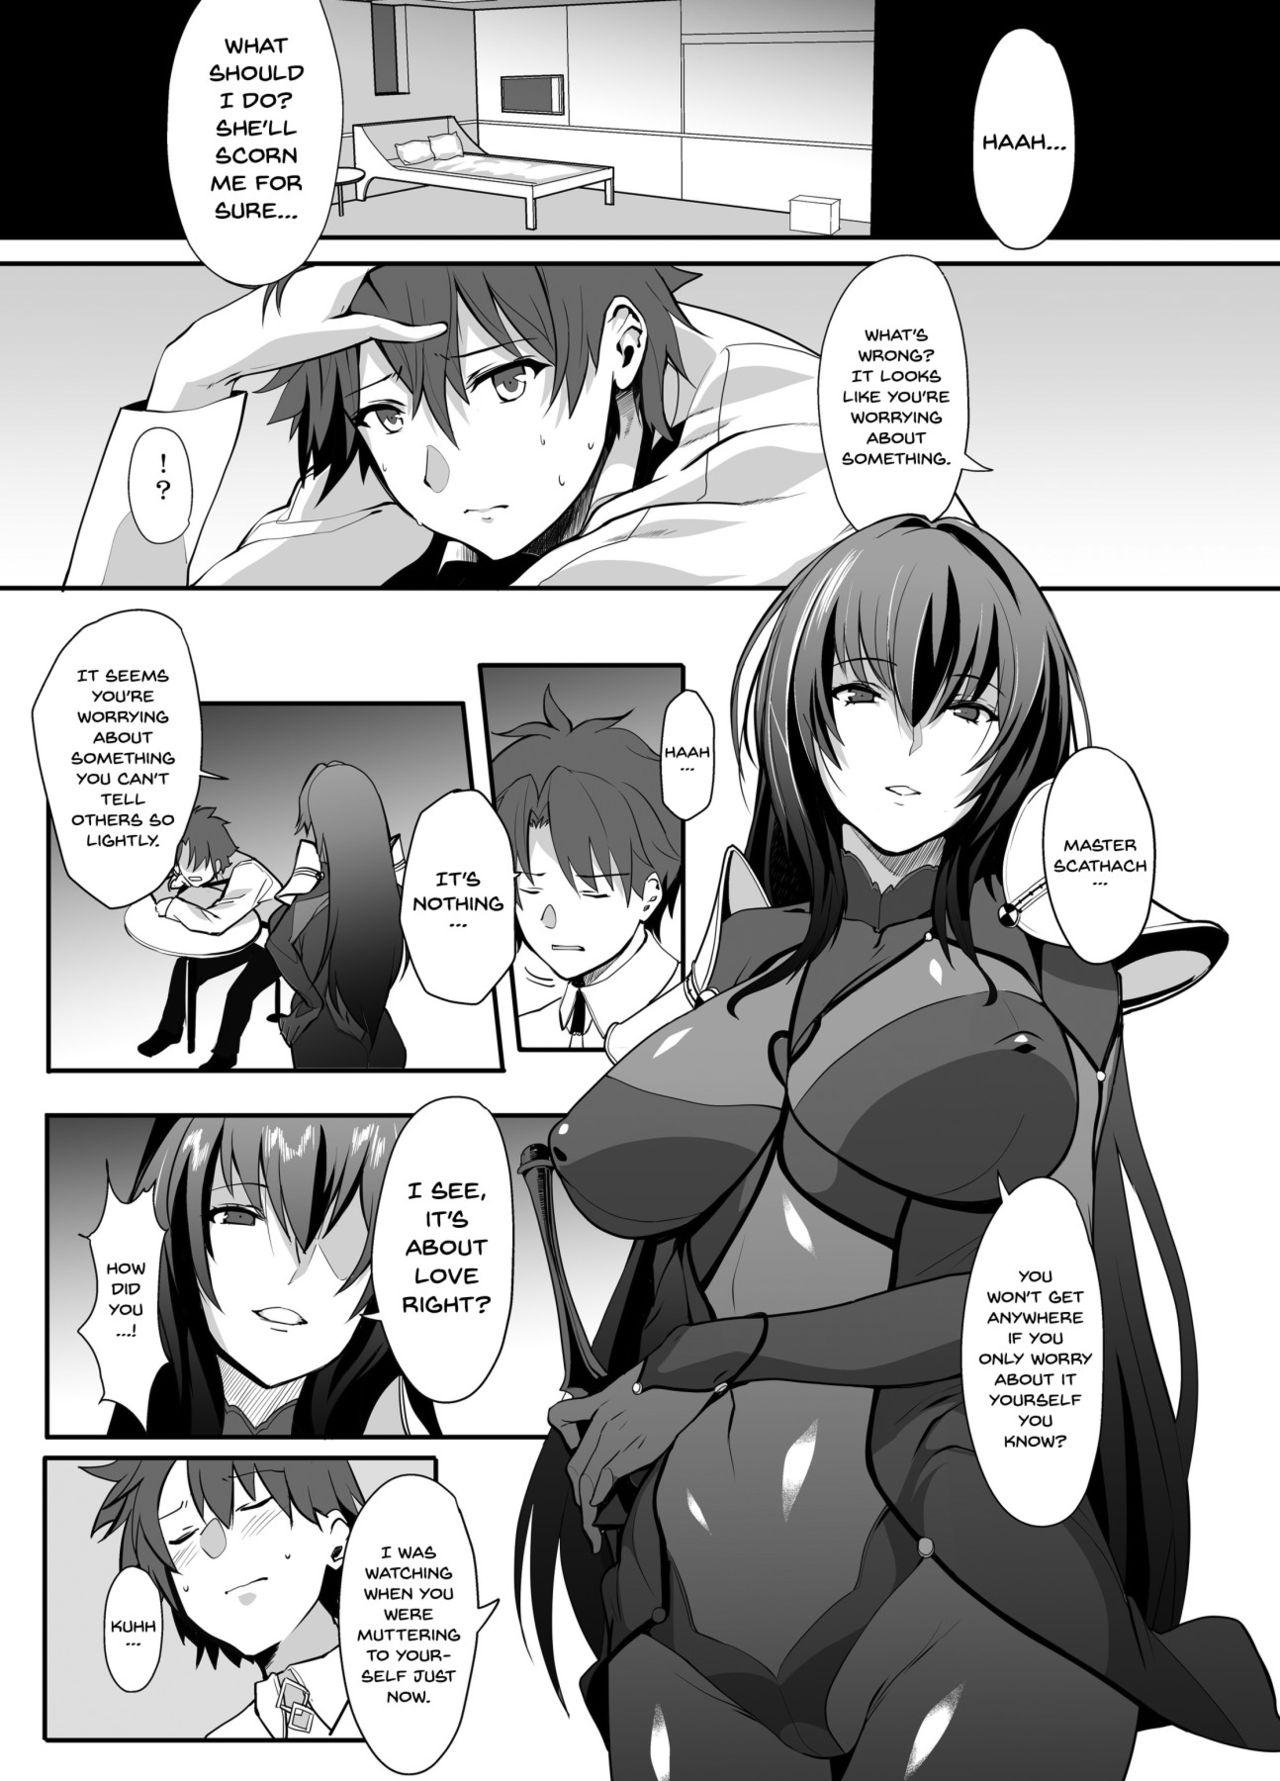 Bareback Scathach Shishou no Dosukebe Lesson | Lewd Lessons With Teacher Scathach - Fate grand order Brunettes - Page 2